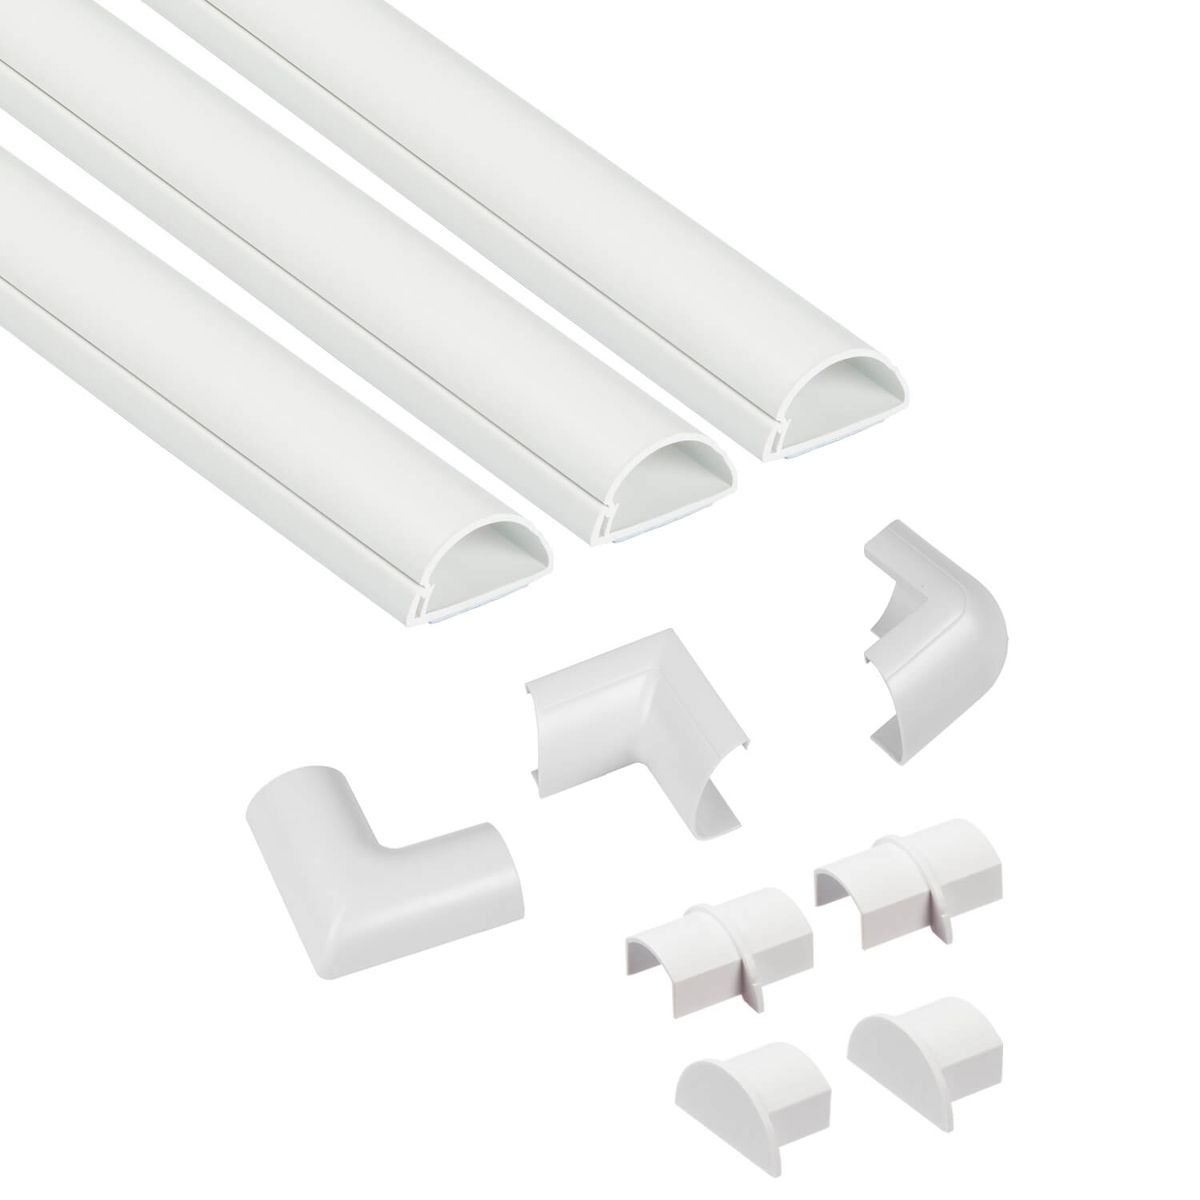 D-Line: Half Round Cable Trunking Kit 30x15mm 3 x 1.0m + Accessories: White